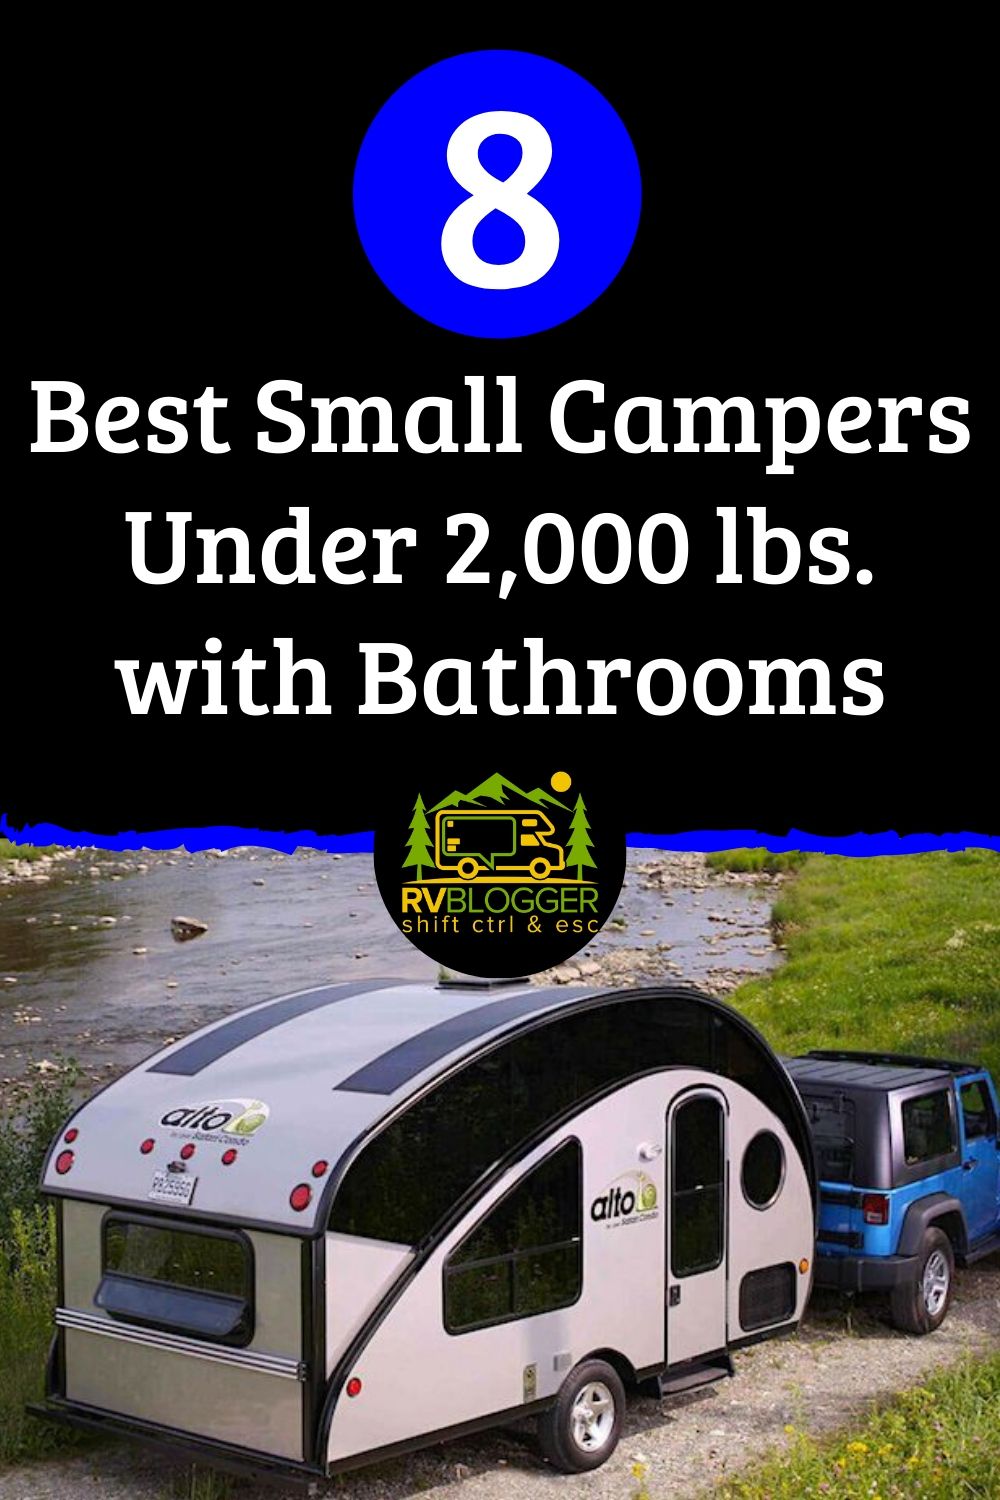 8 Best Small Campers Under 2,000 lbs. with Bathrooms